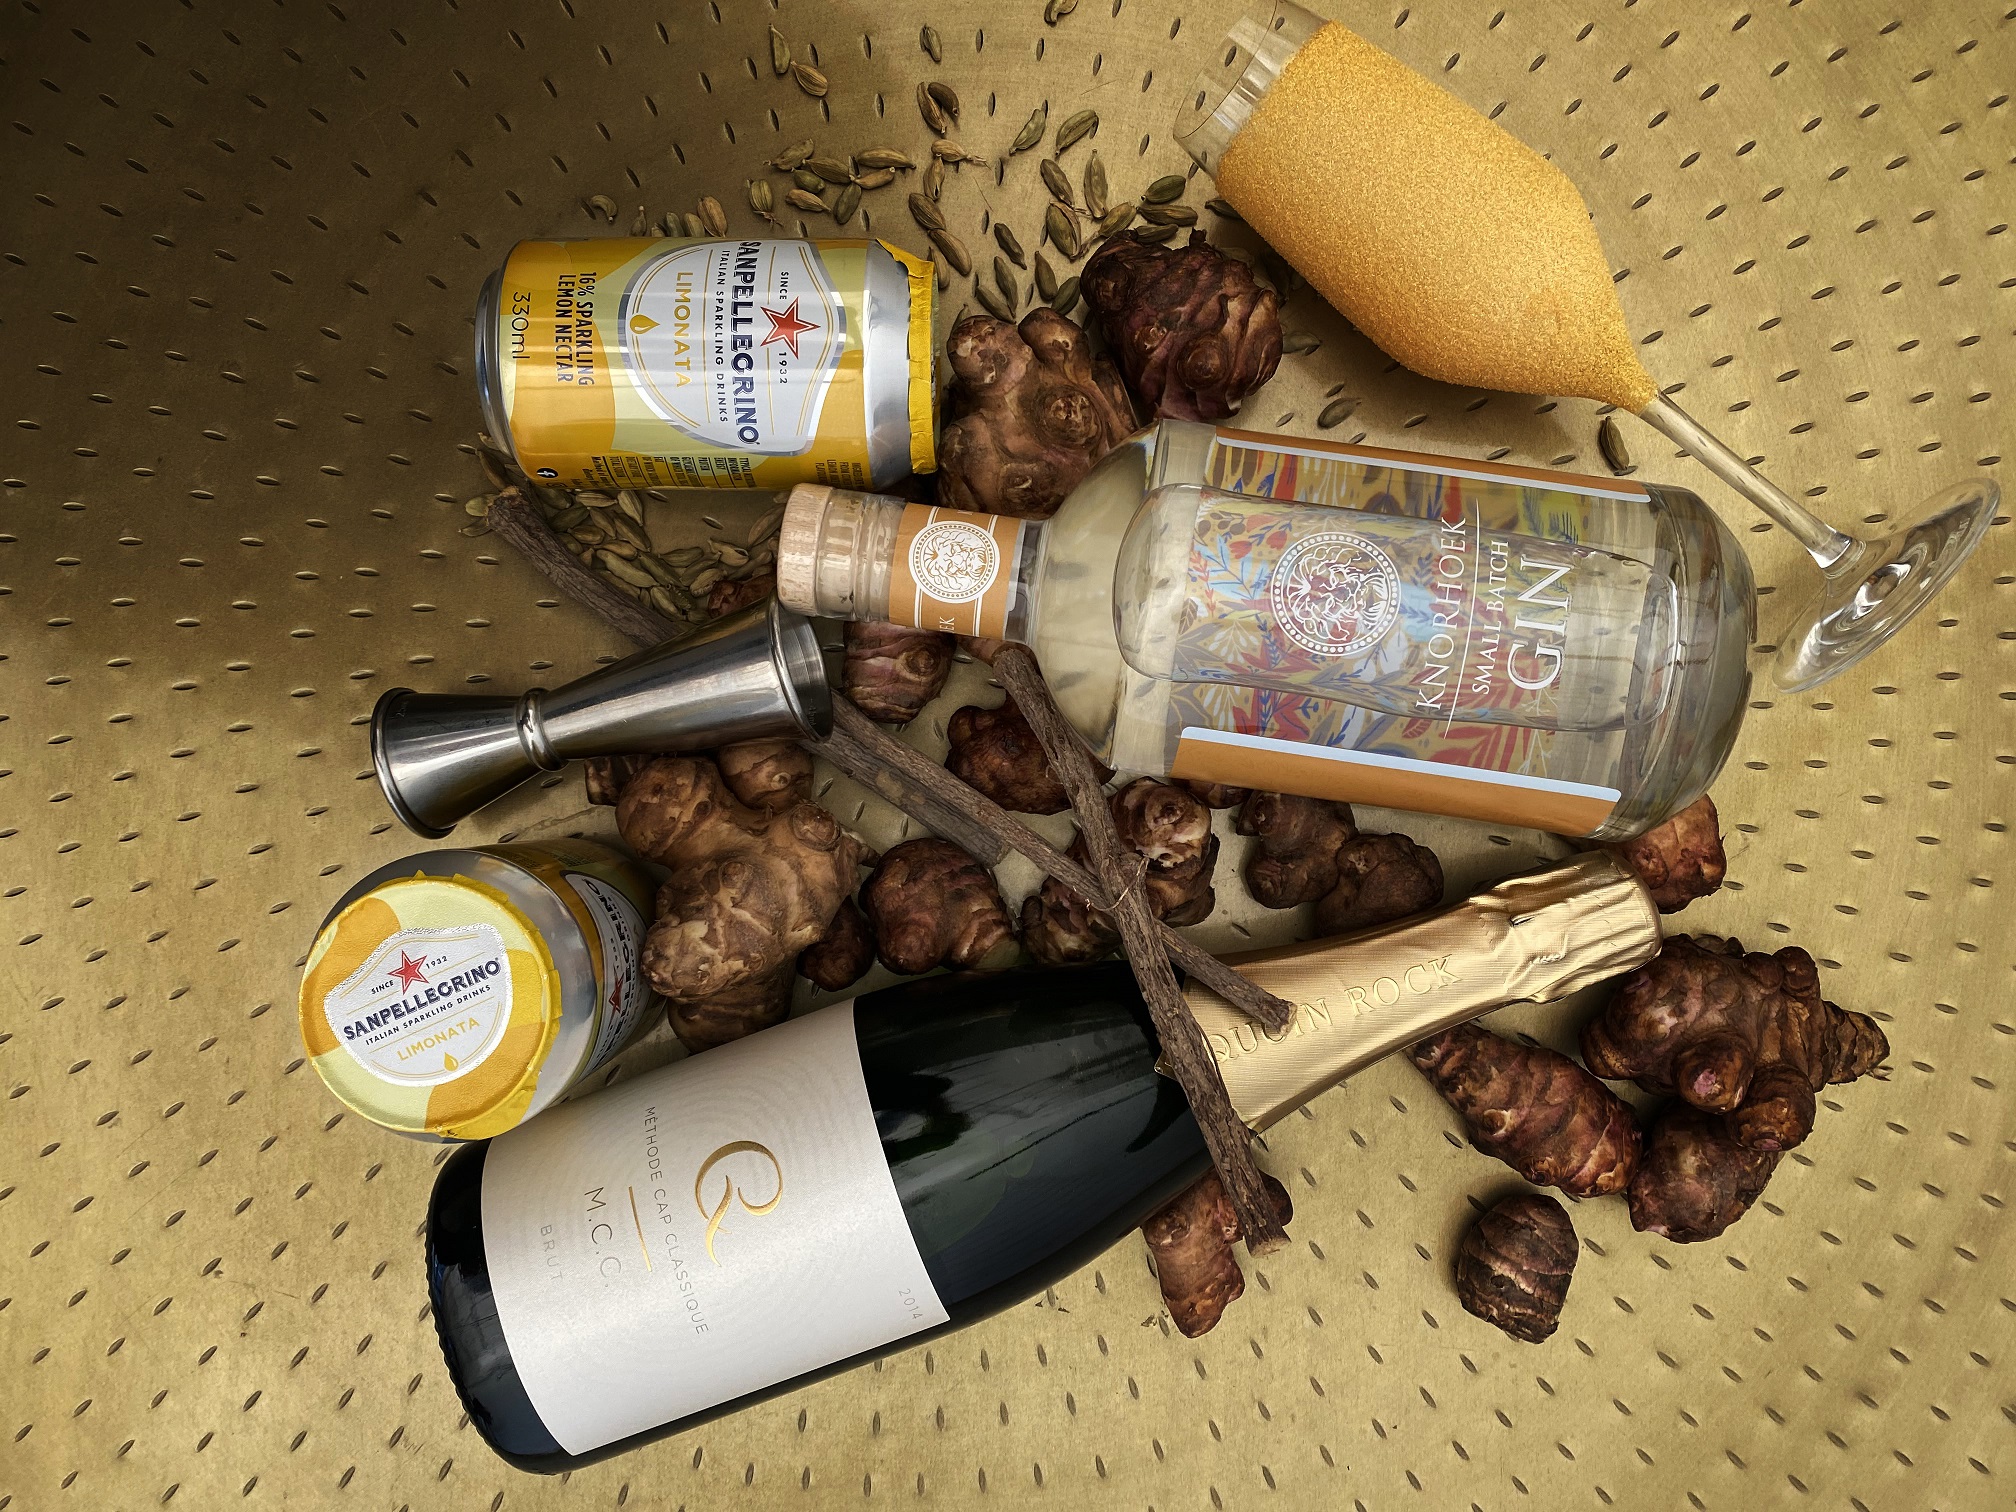 Mixing It Up – The Sanpellegrino Italian Sparkling Drinks Range Of Citrus Flavours Shine As Refreshing Cocktail Mixers For World Cocktail Day And Beyond